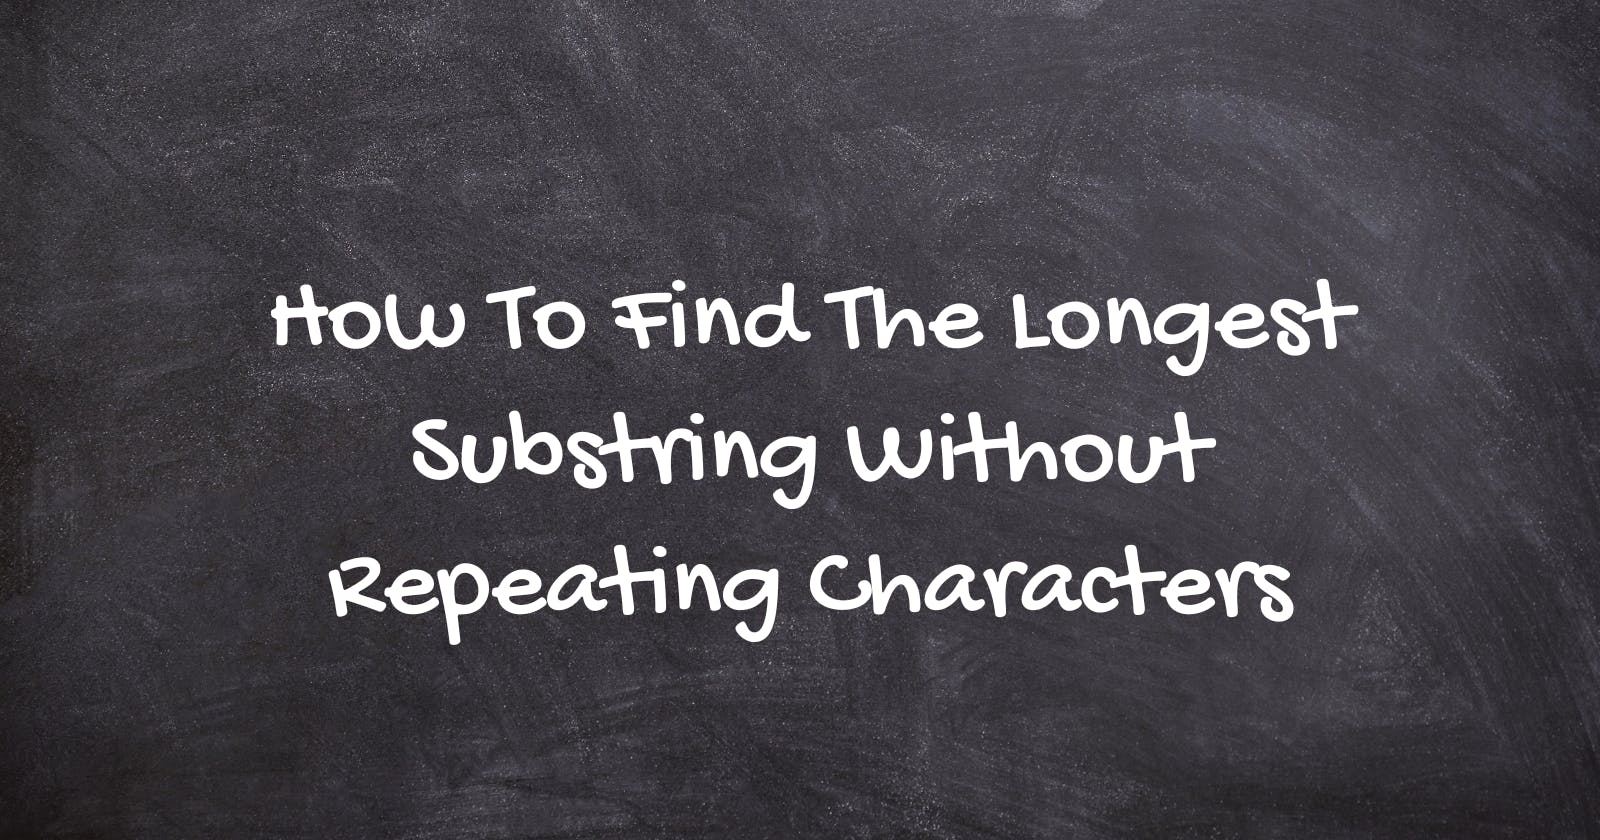 How To Find The Longest Substring Without Repeating Characters